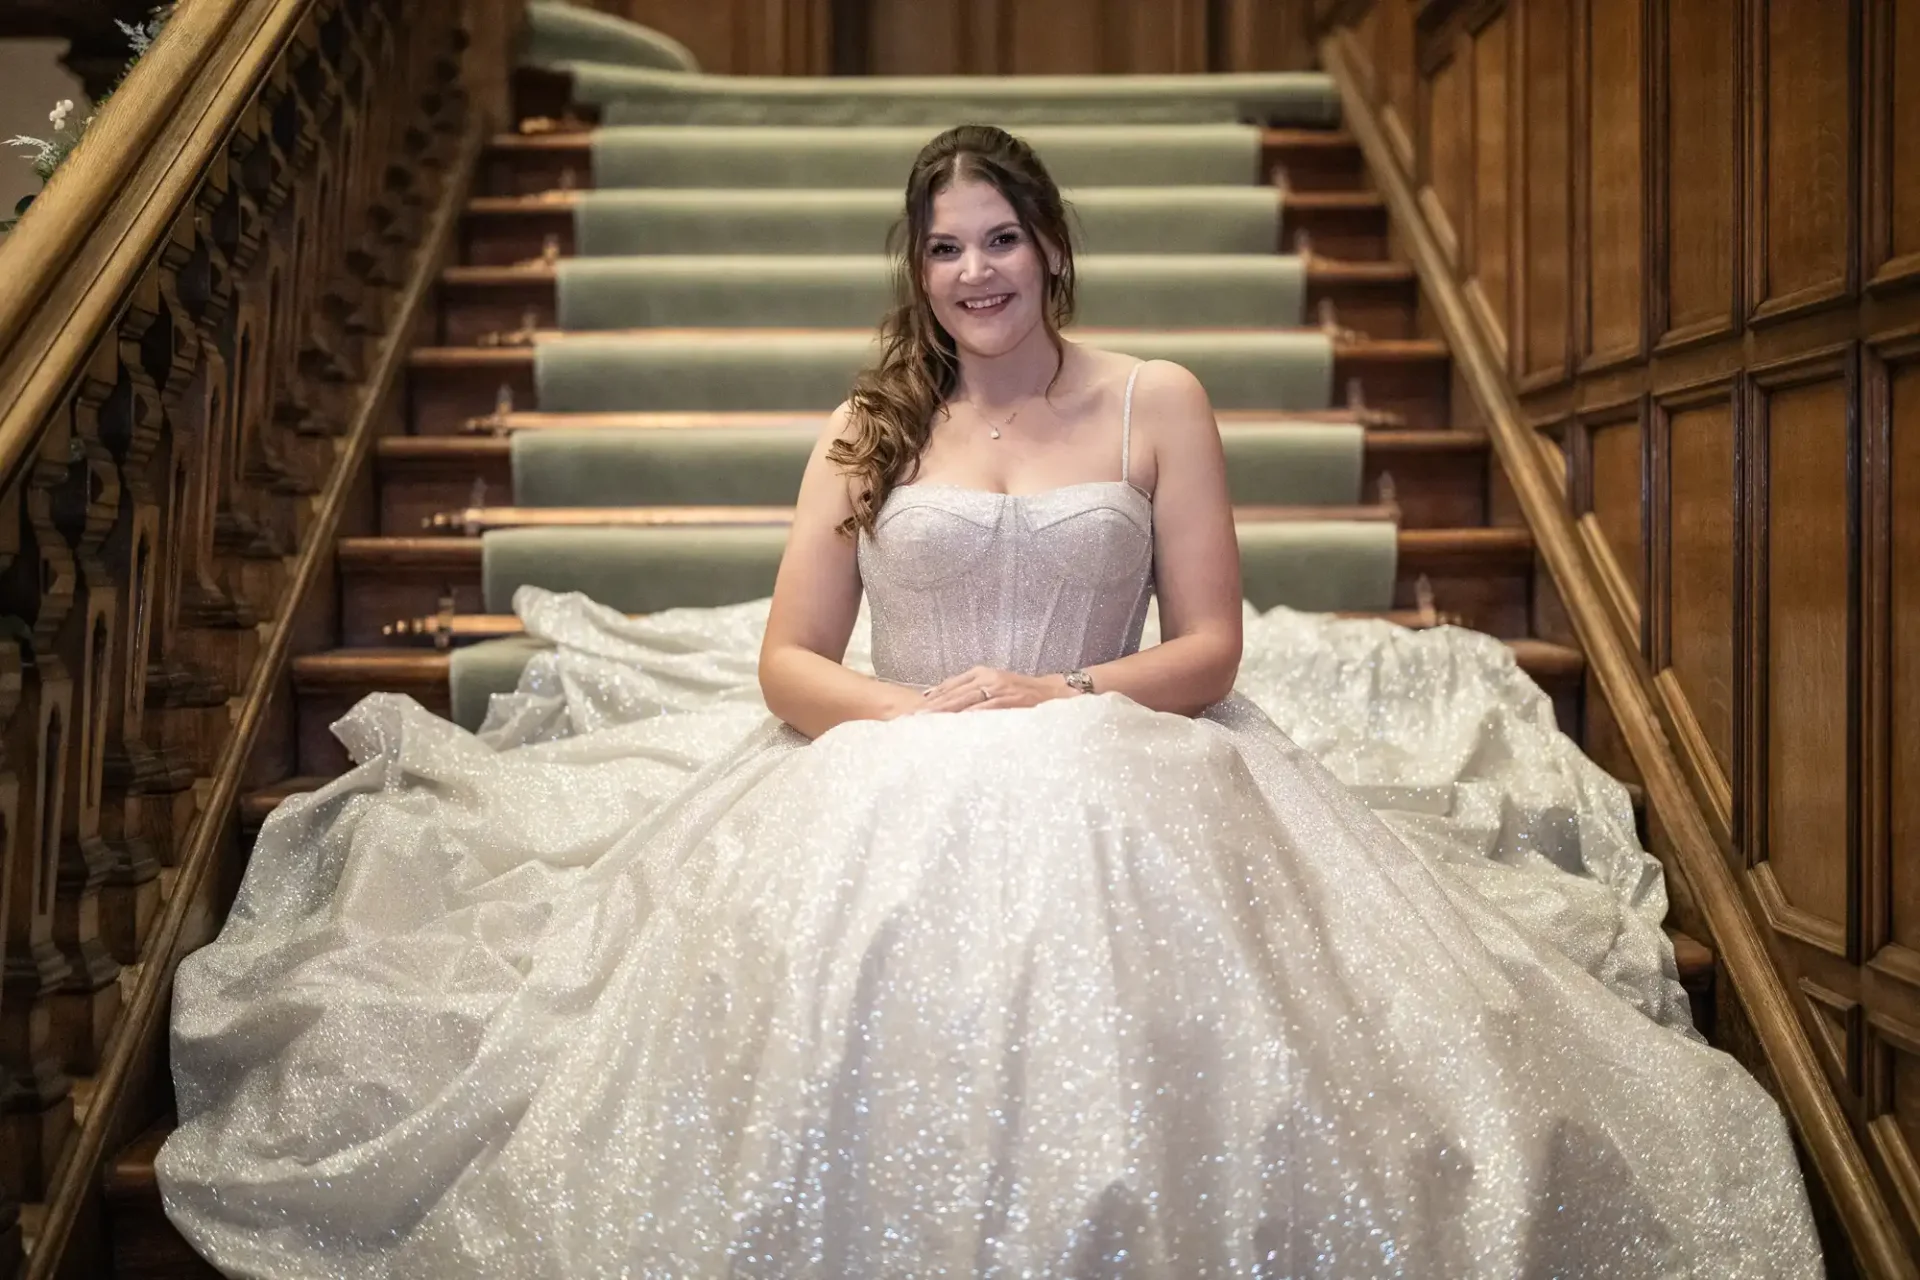 A woman in a sparkling white gown sits on a staircase with wooden paneling in the background, smiling at the camera. .